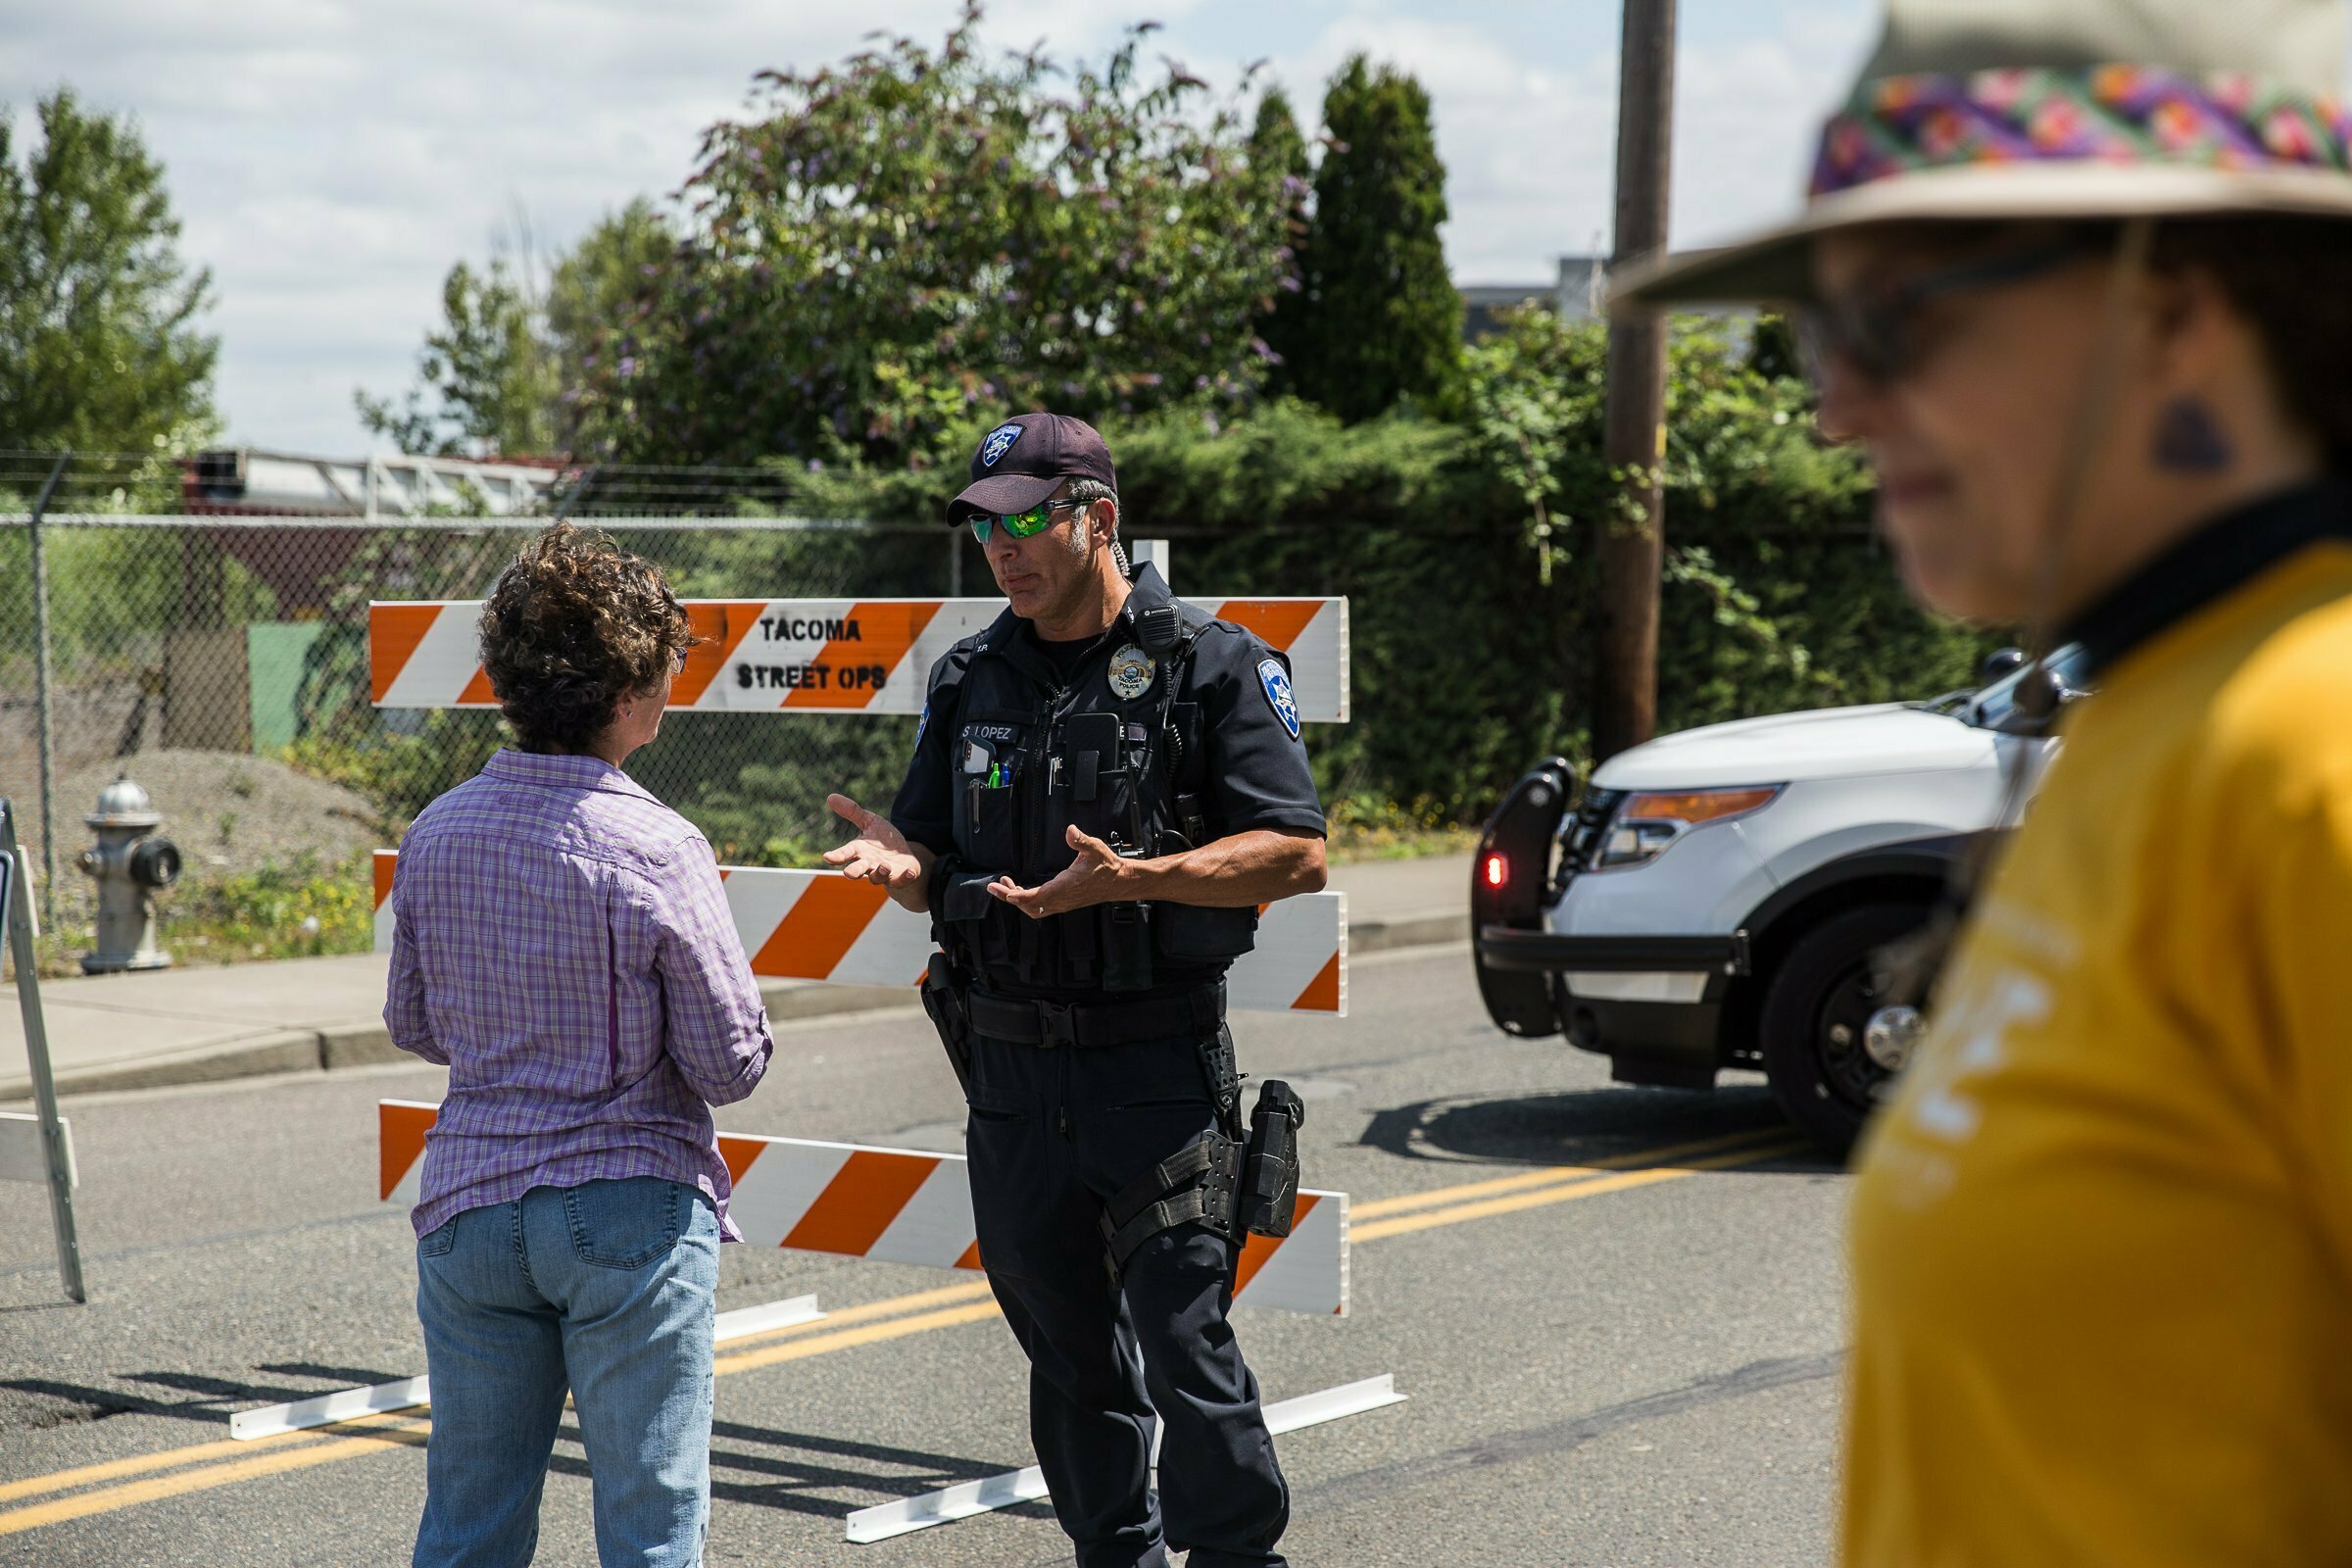 Police Officer Sam Lopez turns away would-be protesters in front of a road block near the Northwest Detention Center, Saturday July 13, 2019 in Tacoma, Wash. A man armed with a rifle threw incendiary devices at an immigration jail in Washington state early Saturday morning, then was found dead after four police officers arrived and opened fire, authorities said. (Rebekah Welch/The Seattle Times via AP)